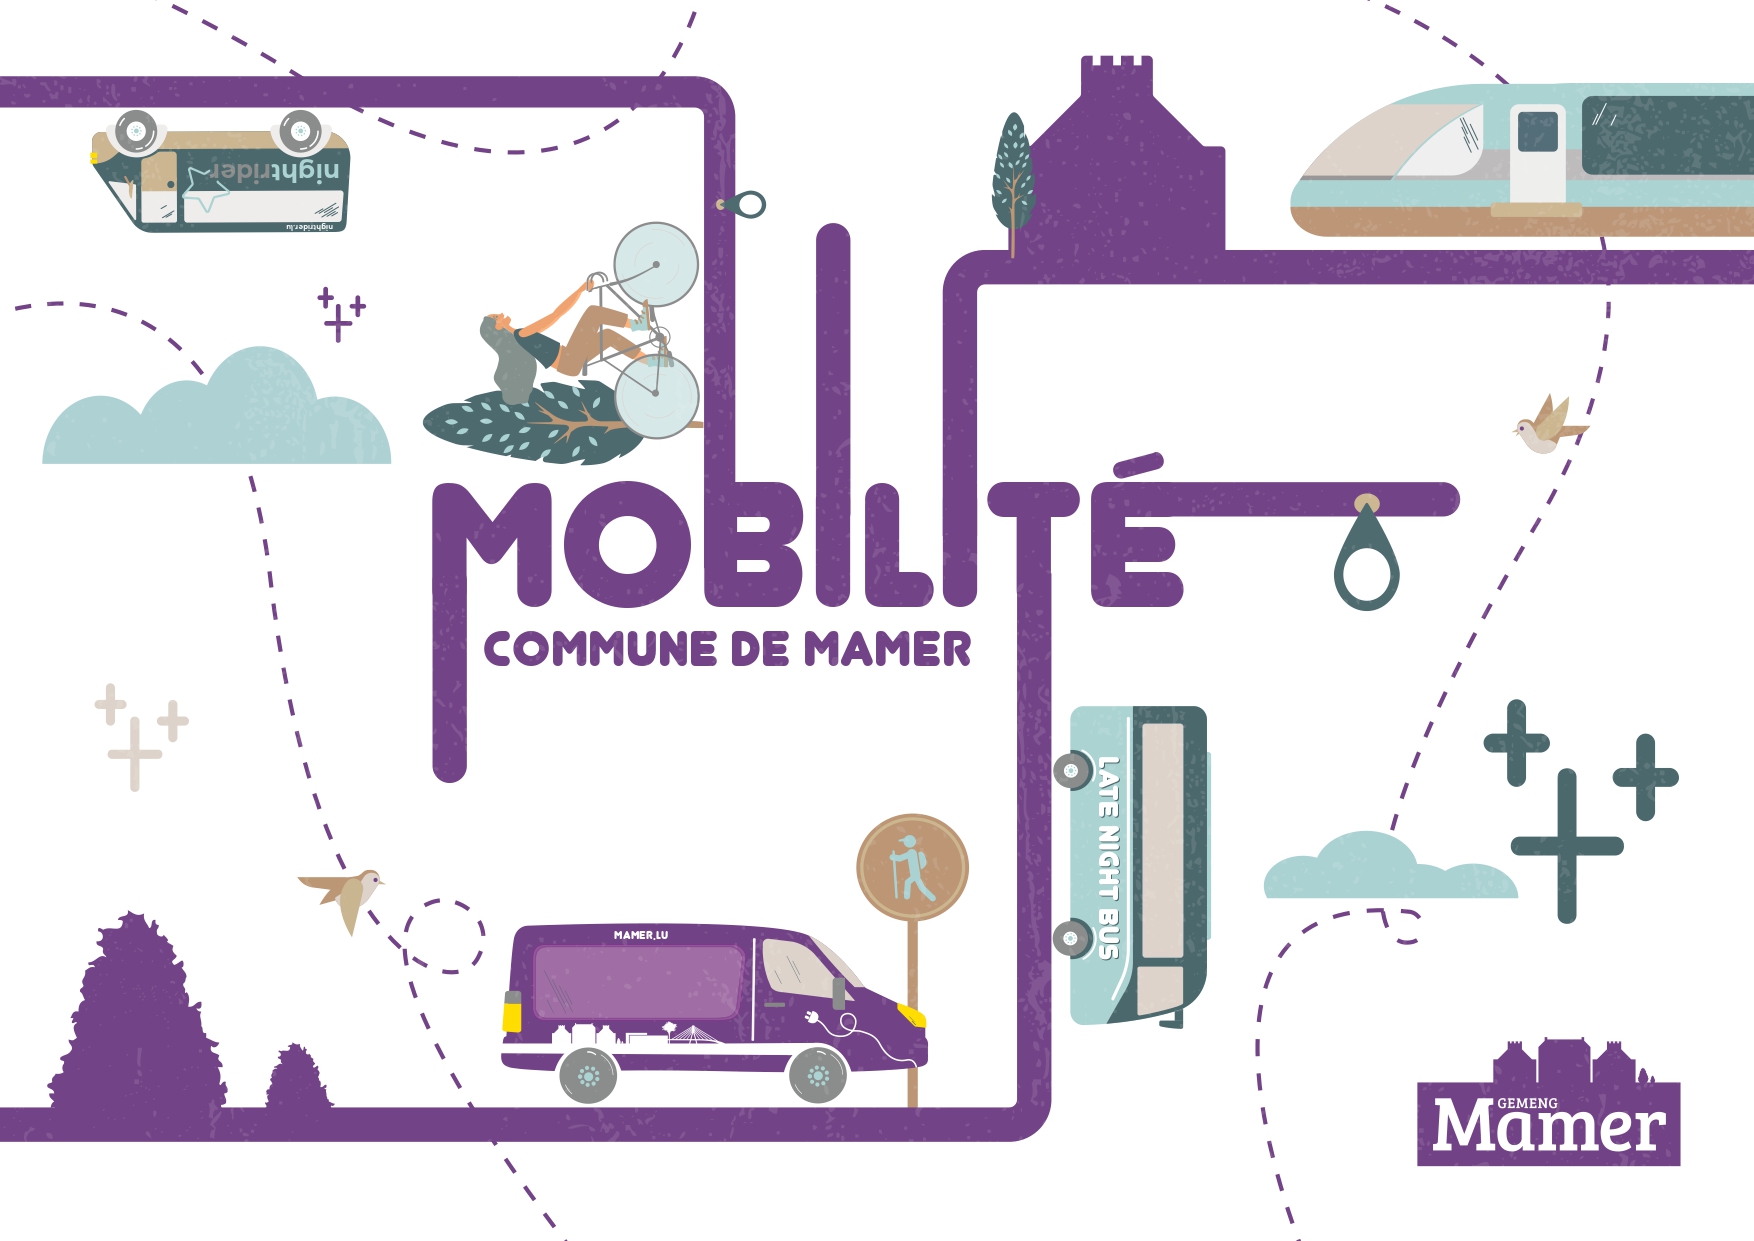 Mobility’ brochure in three languages